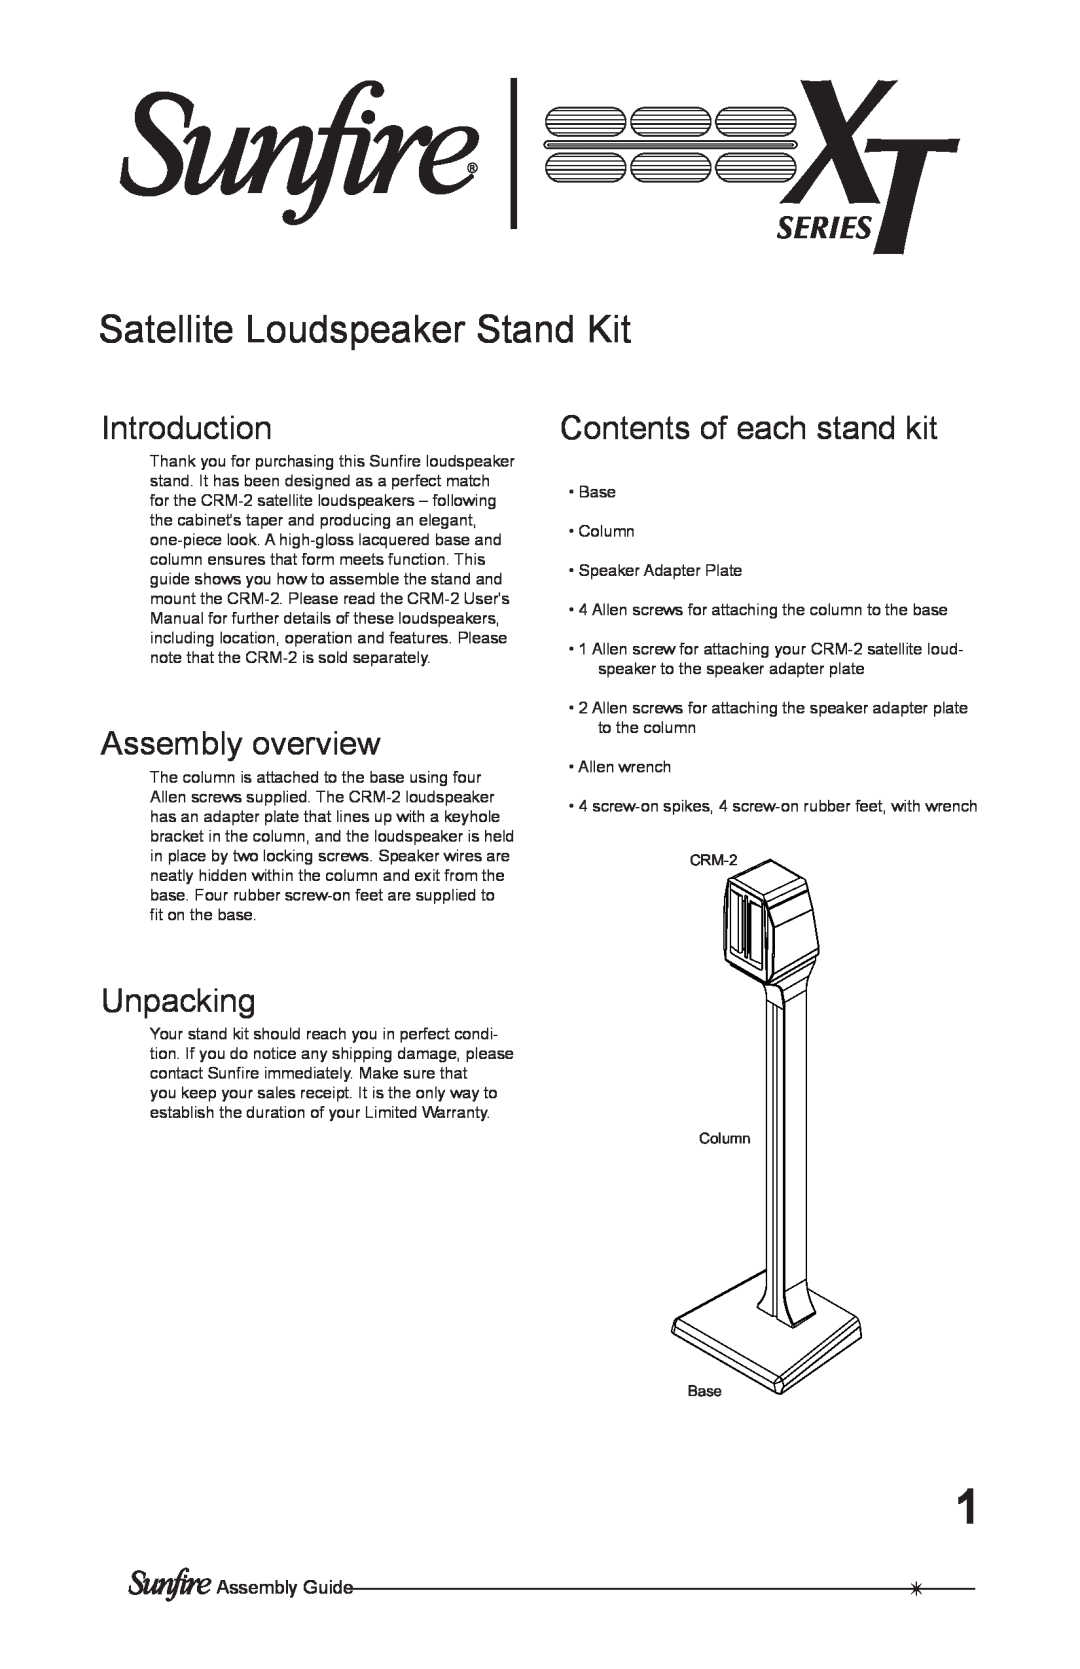 Sunfire Speaker user manual Satellite Loudspeaker Stand Kit, Assembly Guide, Introduction, Assembly overview, Unpacking 